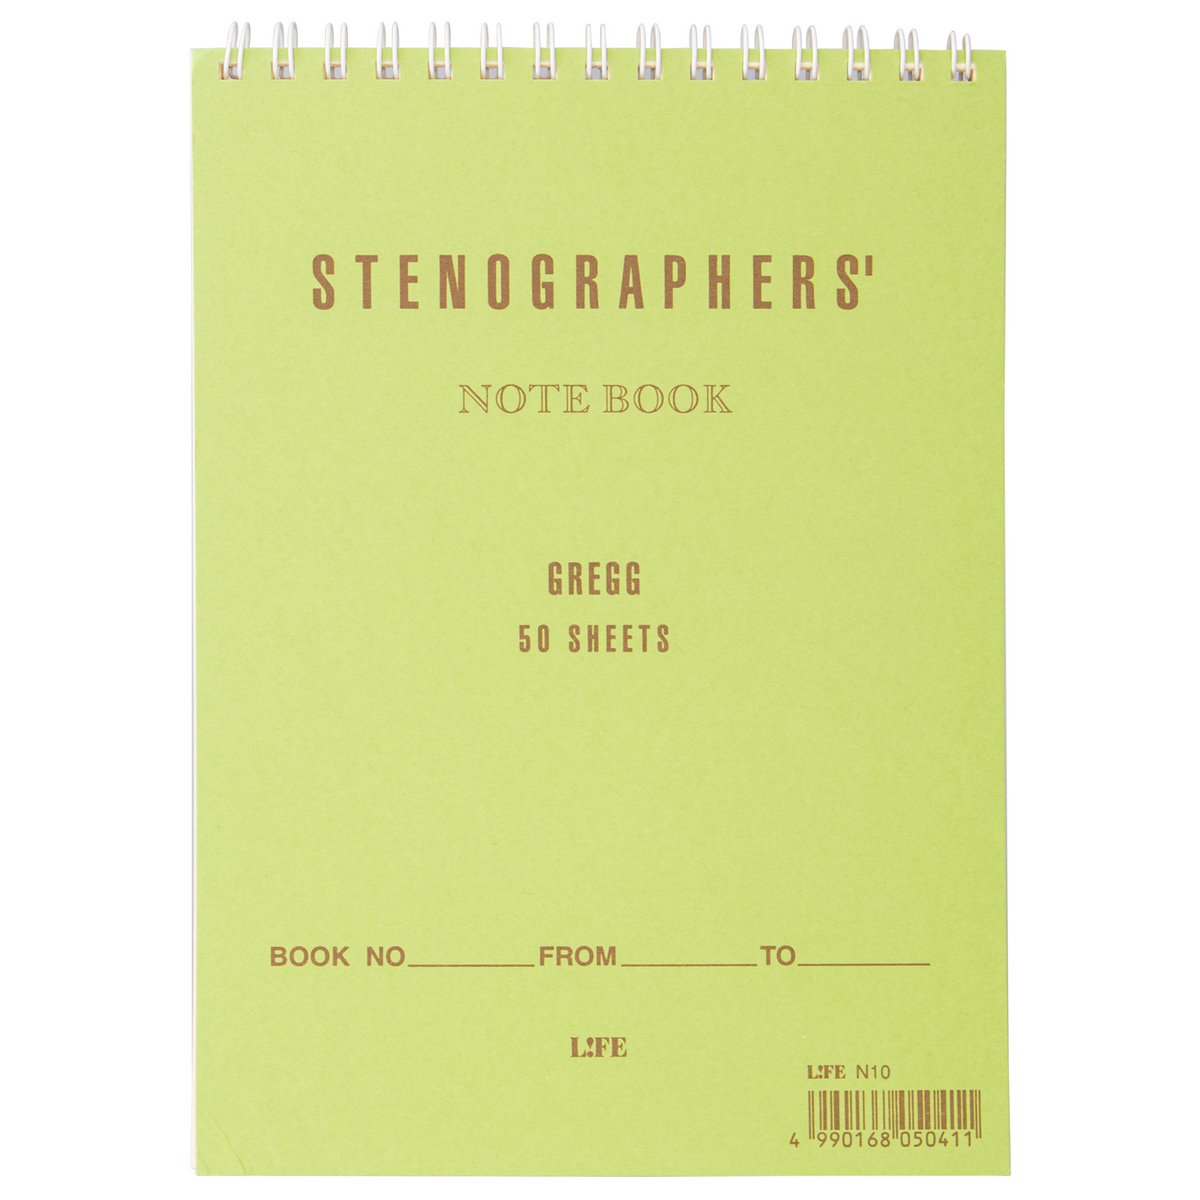 Life Stationery Stenographer's Notebook- Green Cover